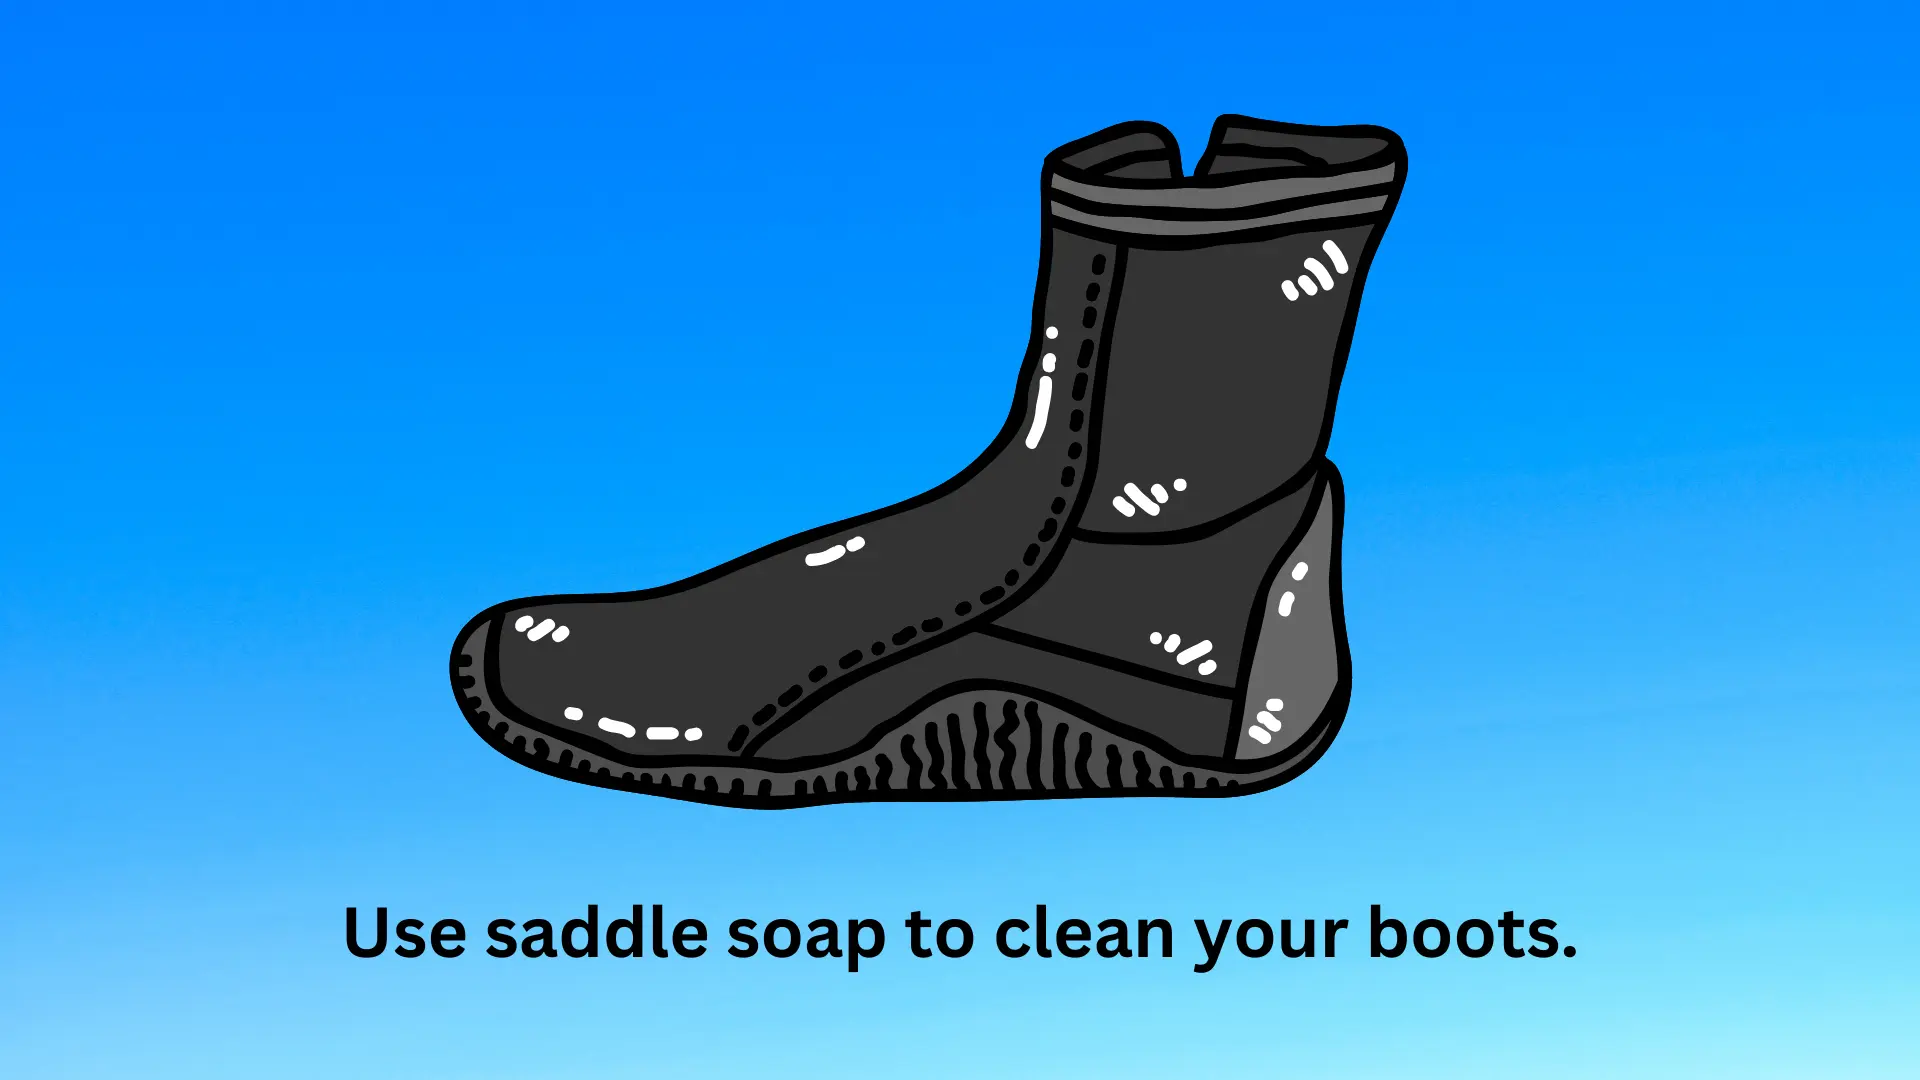 Use saddle soap to clean your boots.